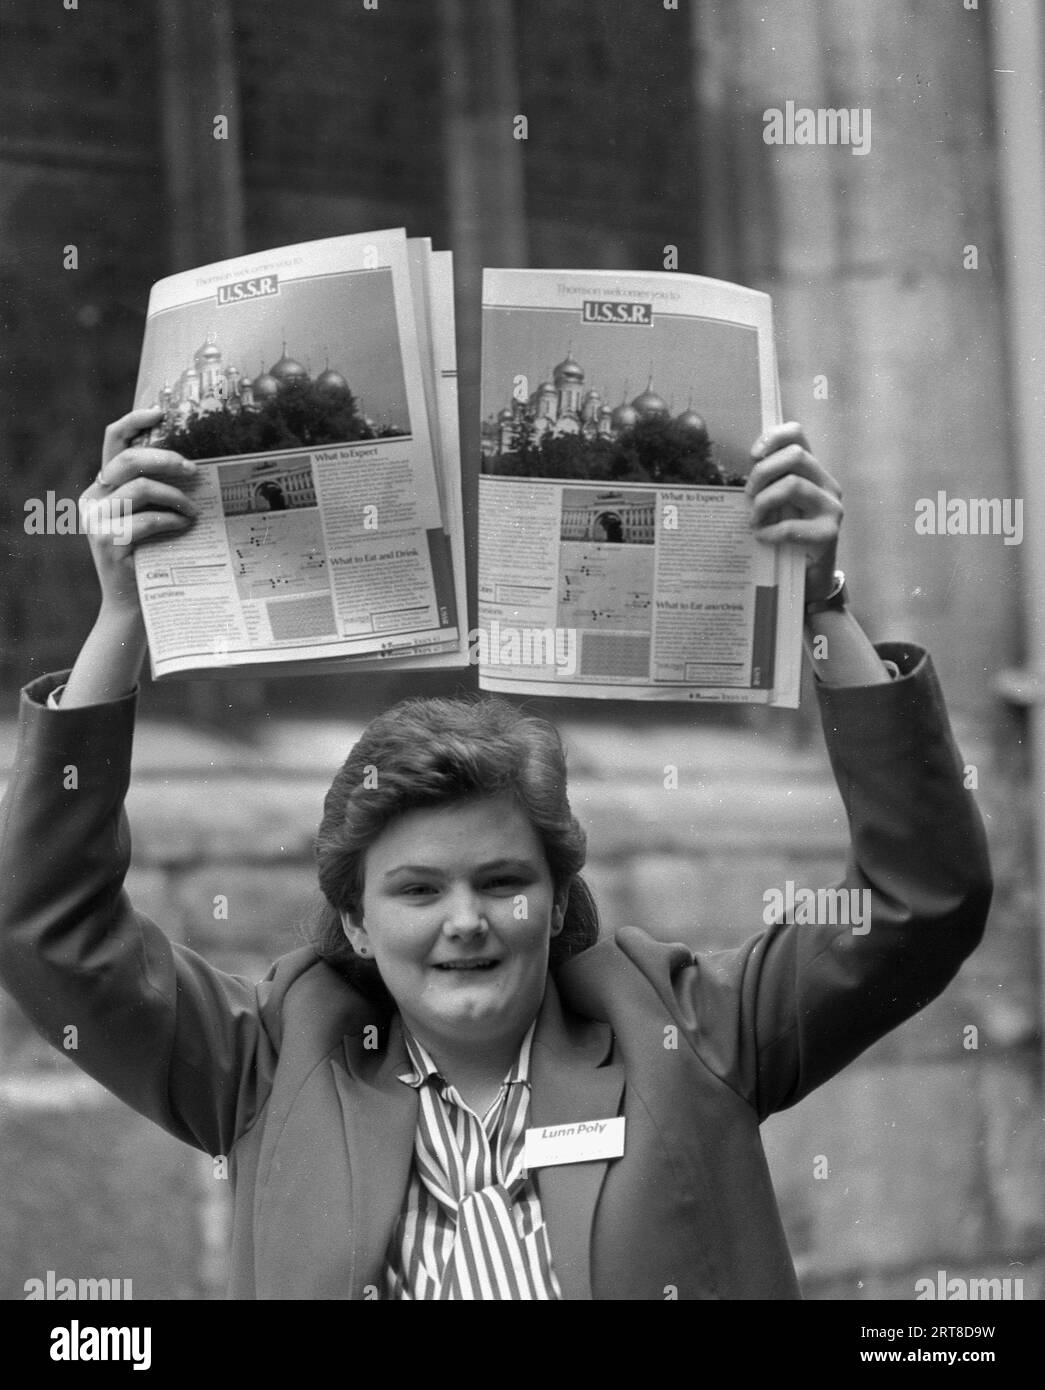 1987, a female travel agent holding up brochures about their new vacation trips to visit the USSR, as the country under its president, Mikhail Gorbachev began to open itself up to visitors and tourists which had previously been denied. Yet only a few years later in December 1991, the Union of Soviet Socialist Republics (USSR), the old Soviet Union, broke up and became 15 independent countries. Stock Photo